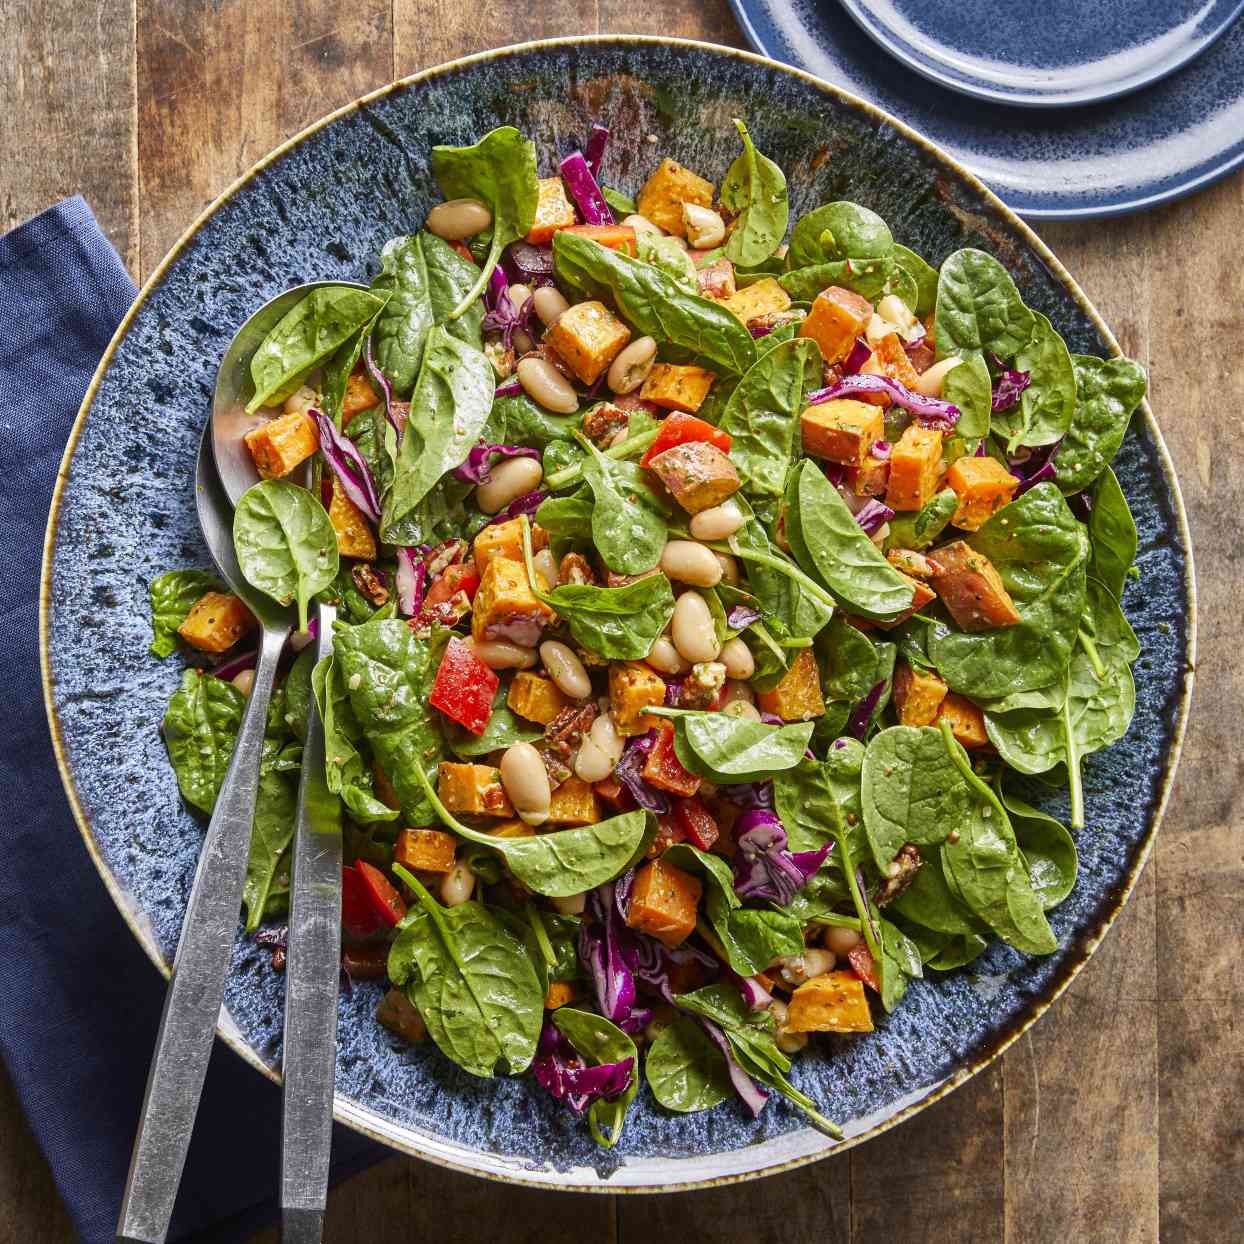 Spinach Salad with Roasted Sweet Potatoes, White Beans & Basil Vinaigrette